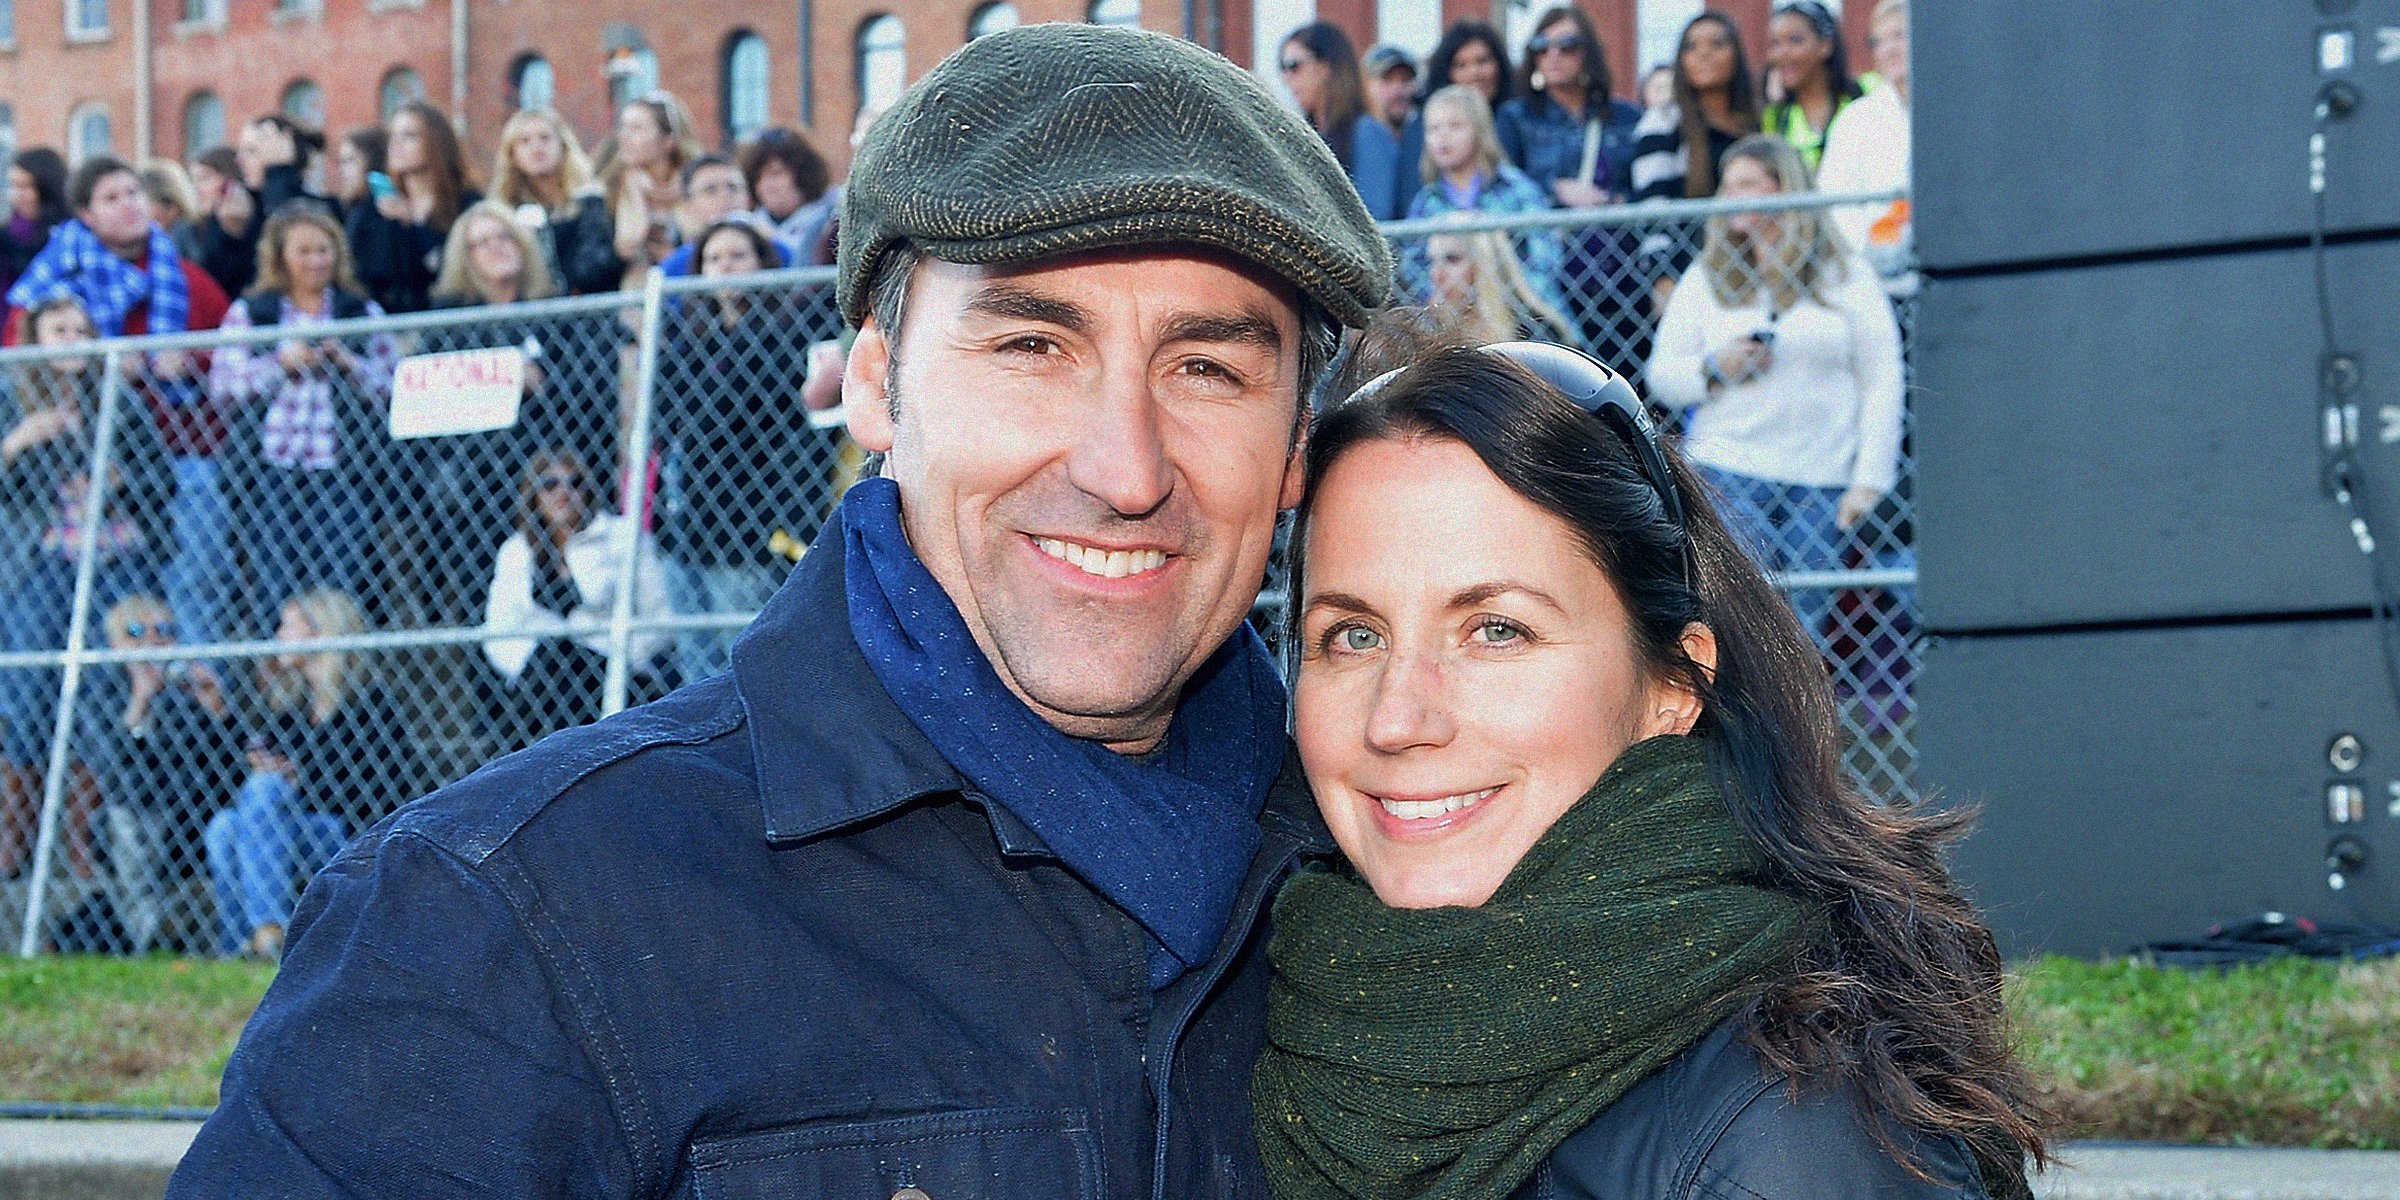 Mike Wolfe and Jodi Faeth, 2013 I Source: Getty Images